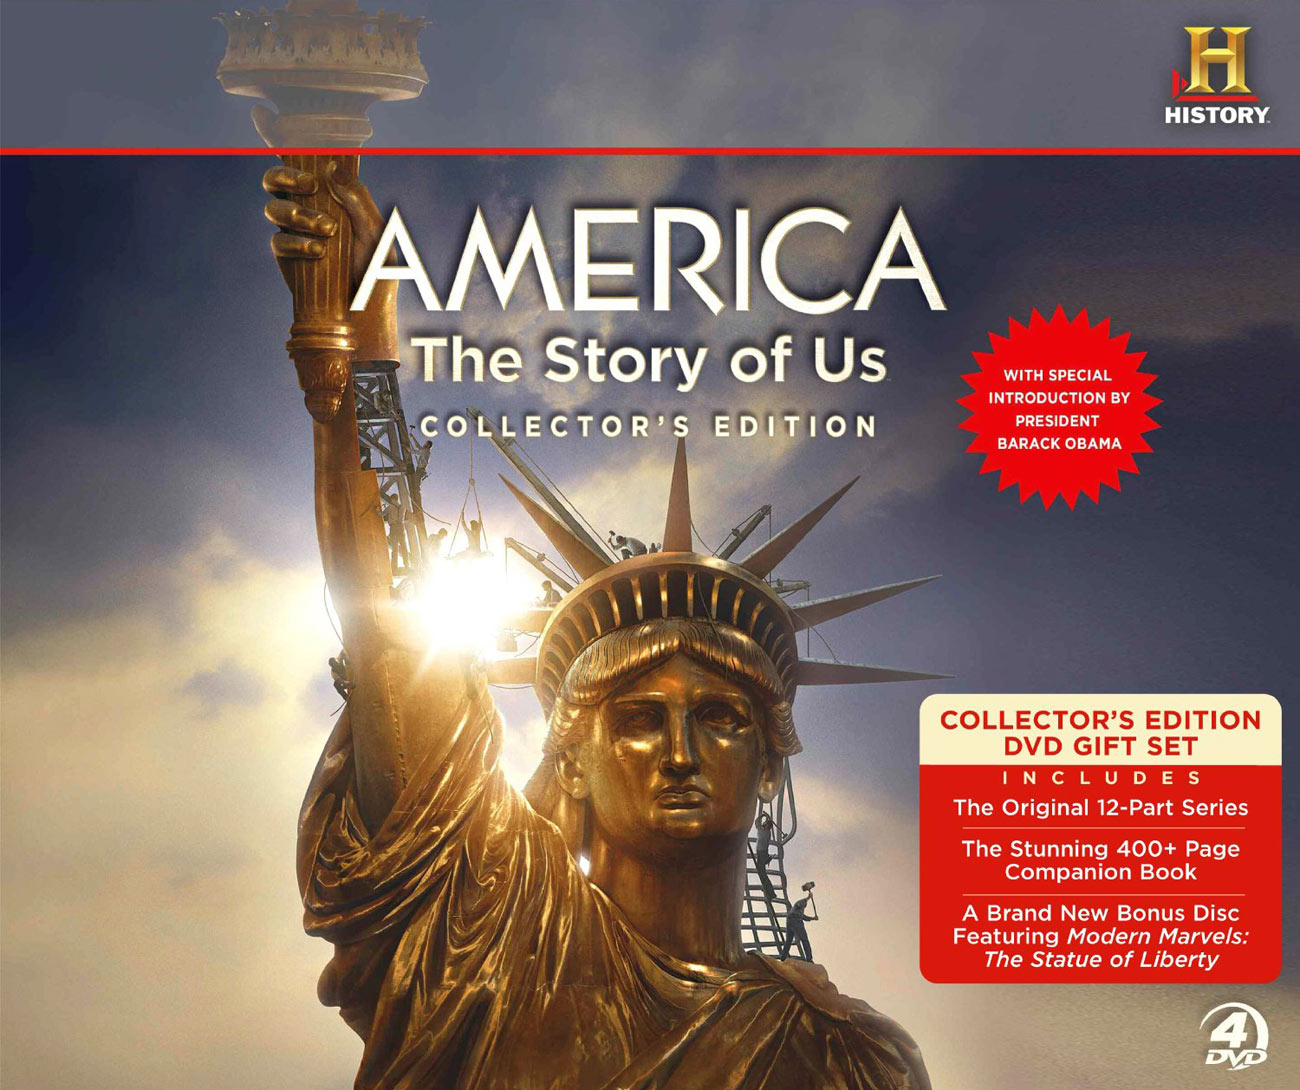 America: The Story of Us DVD packaging